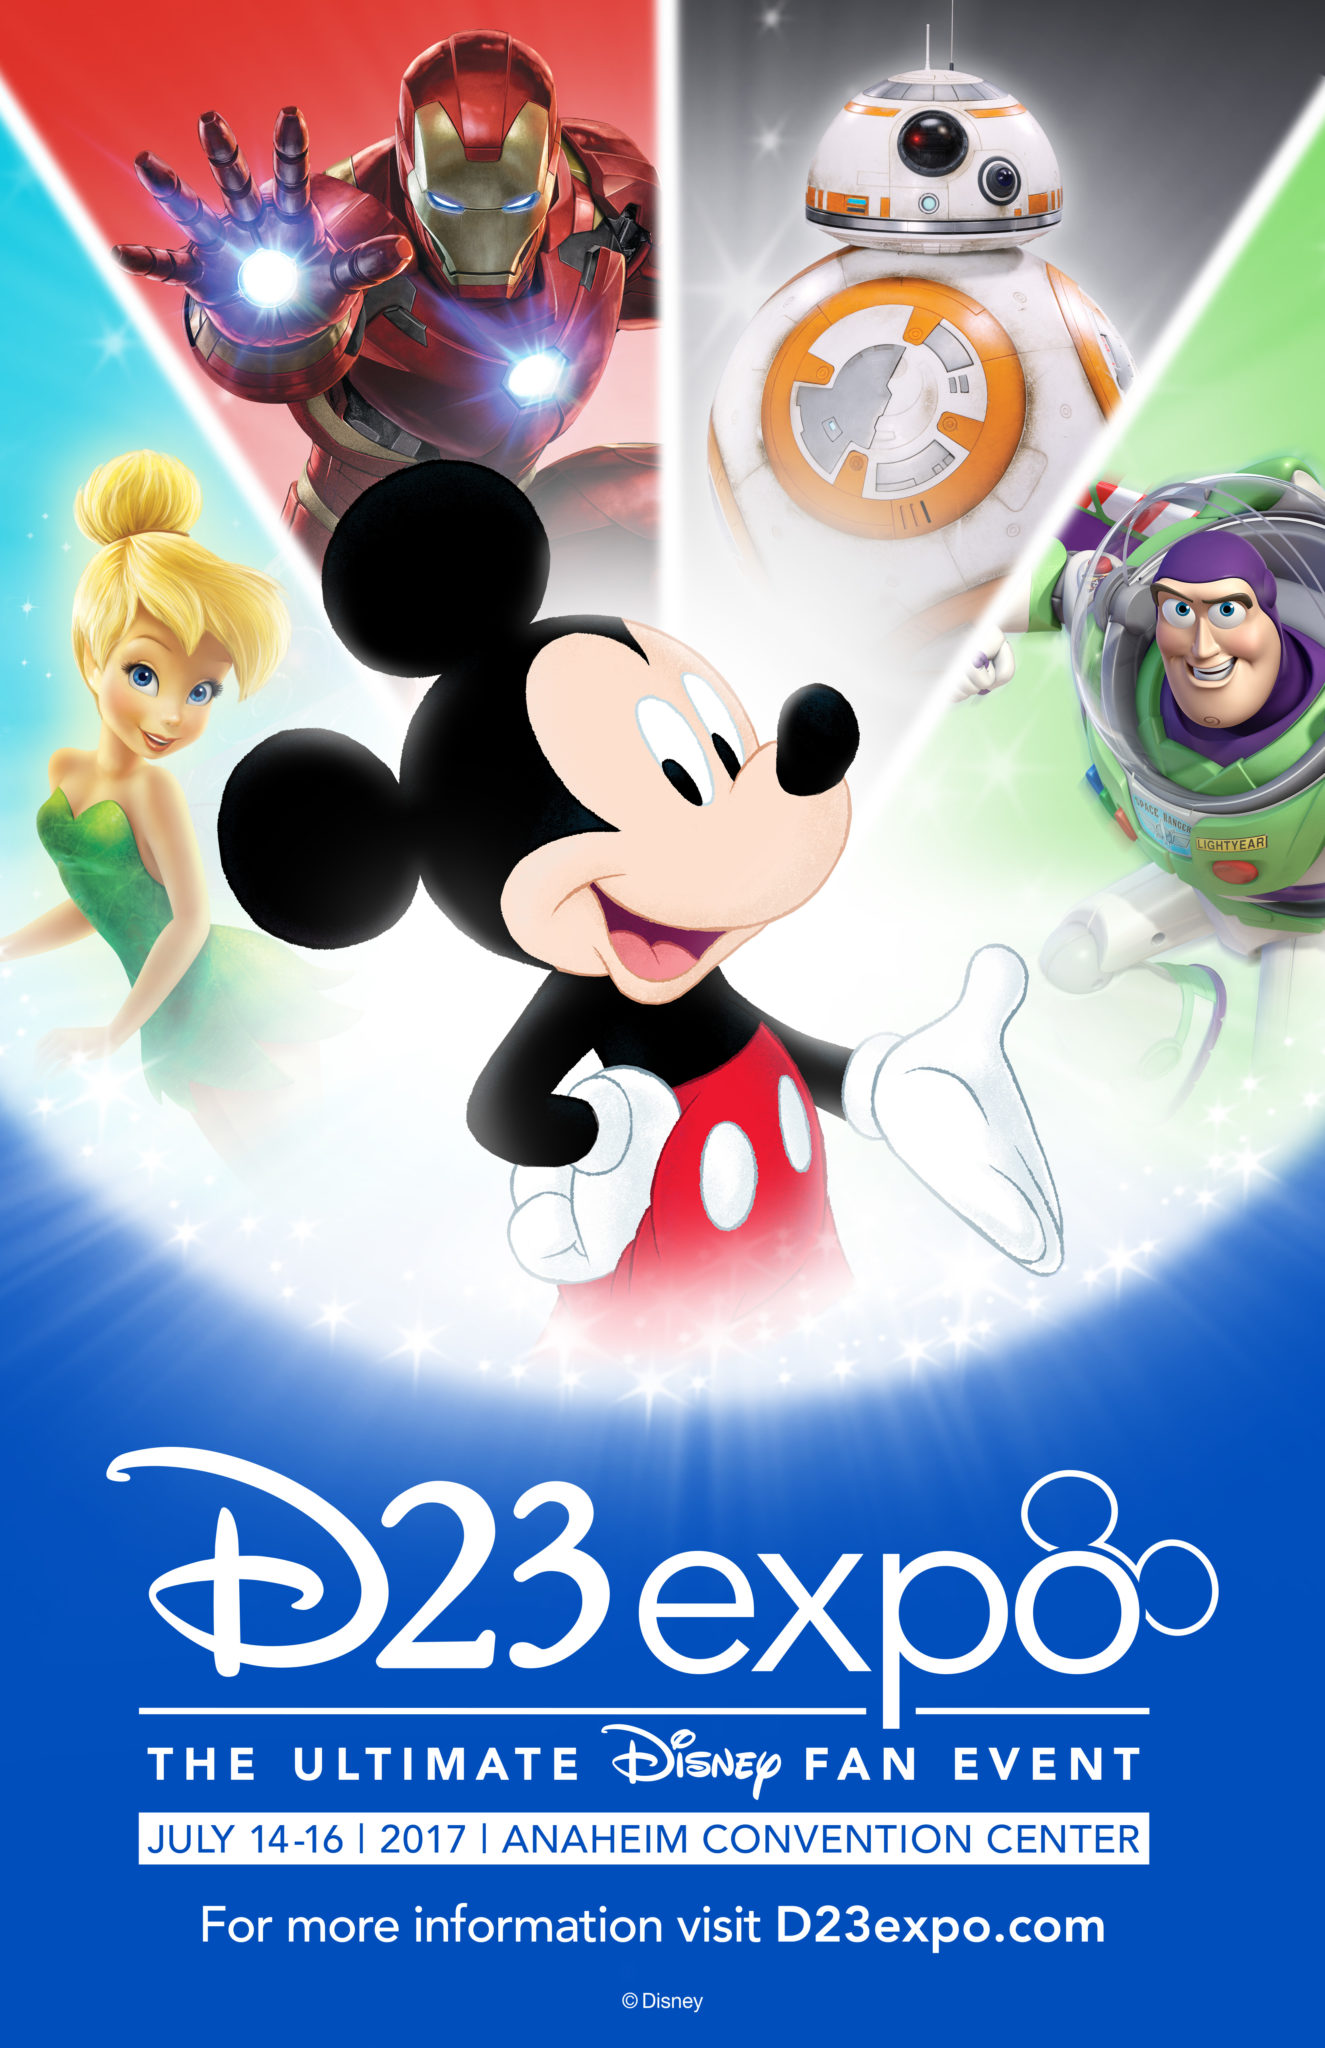 Single-Day Saturday Tickets To This Year’s D23 Expo Have Sold Out!